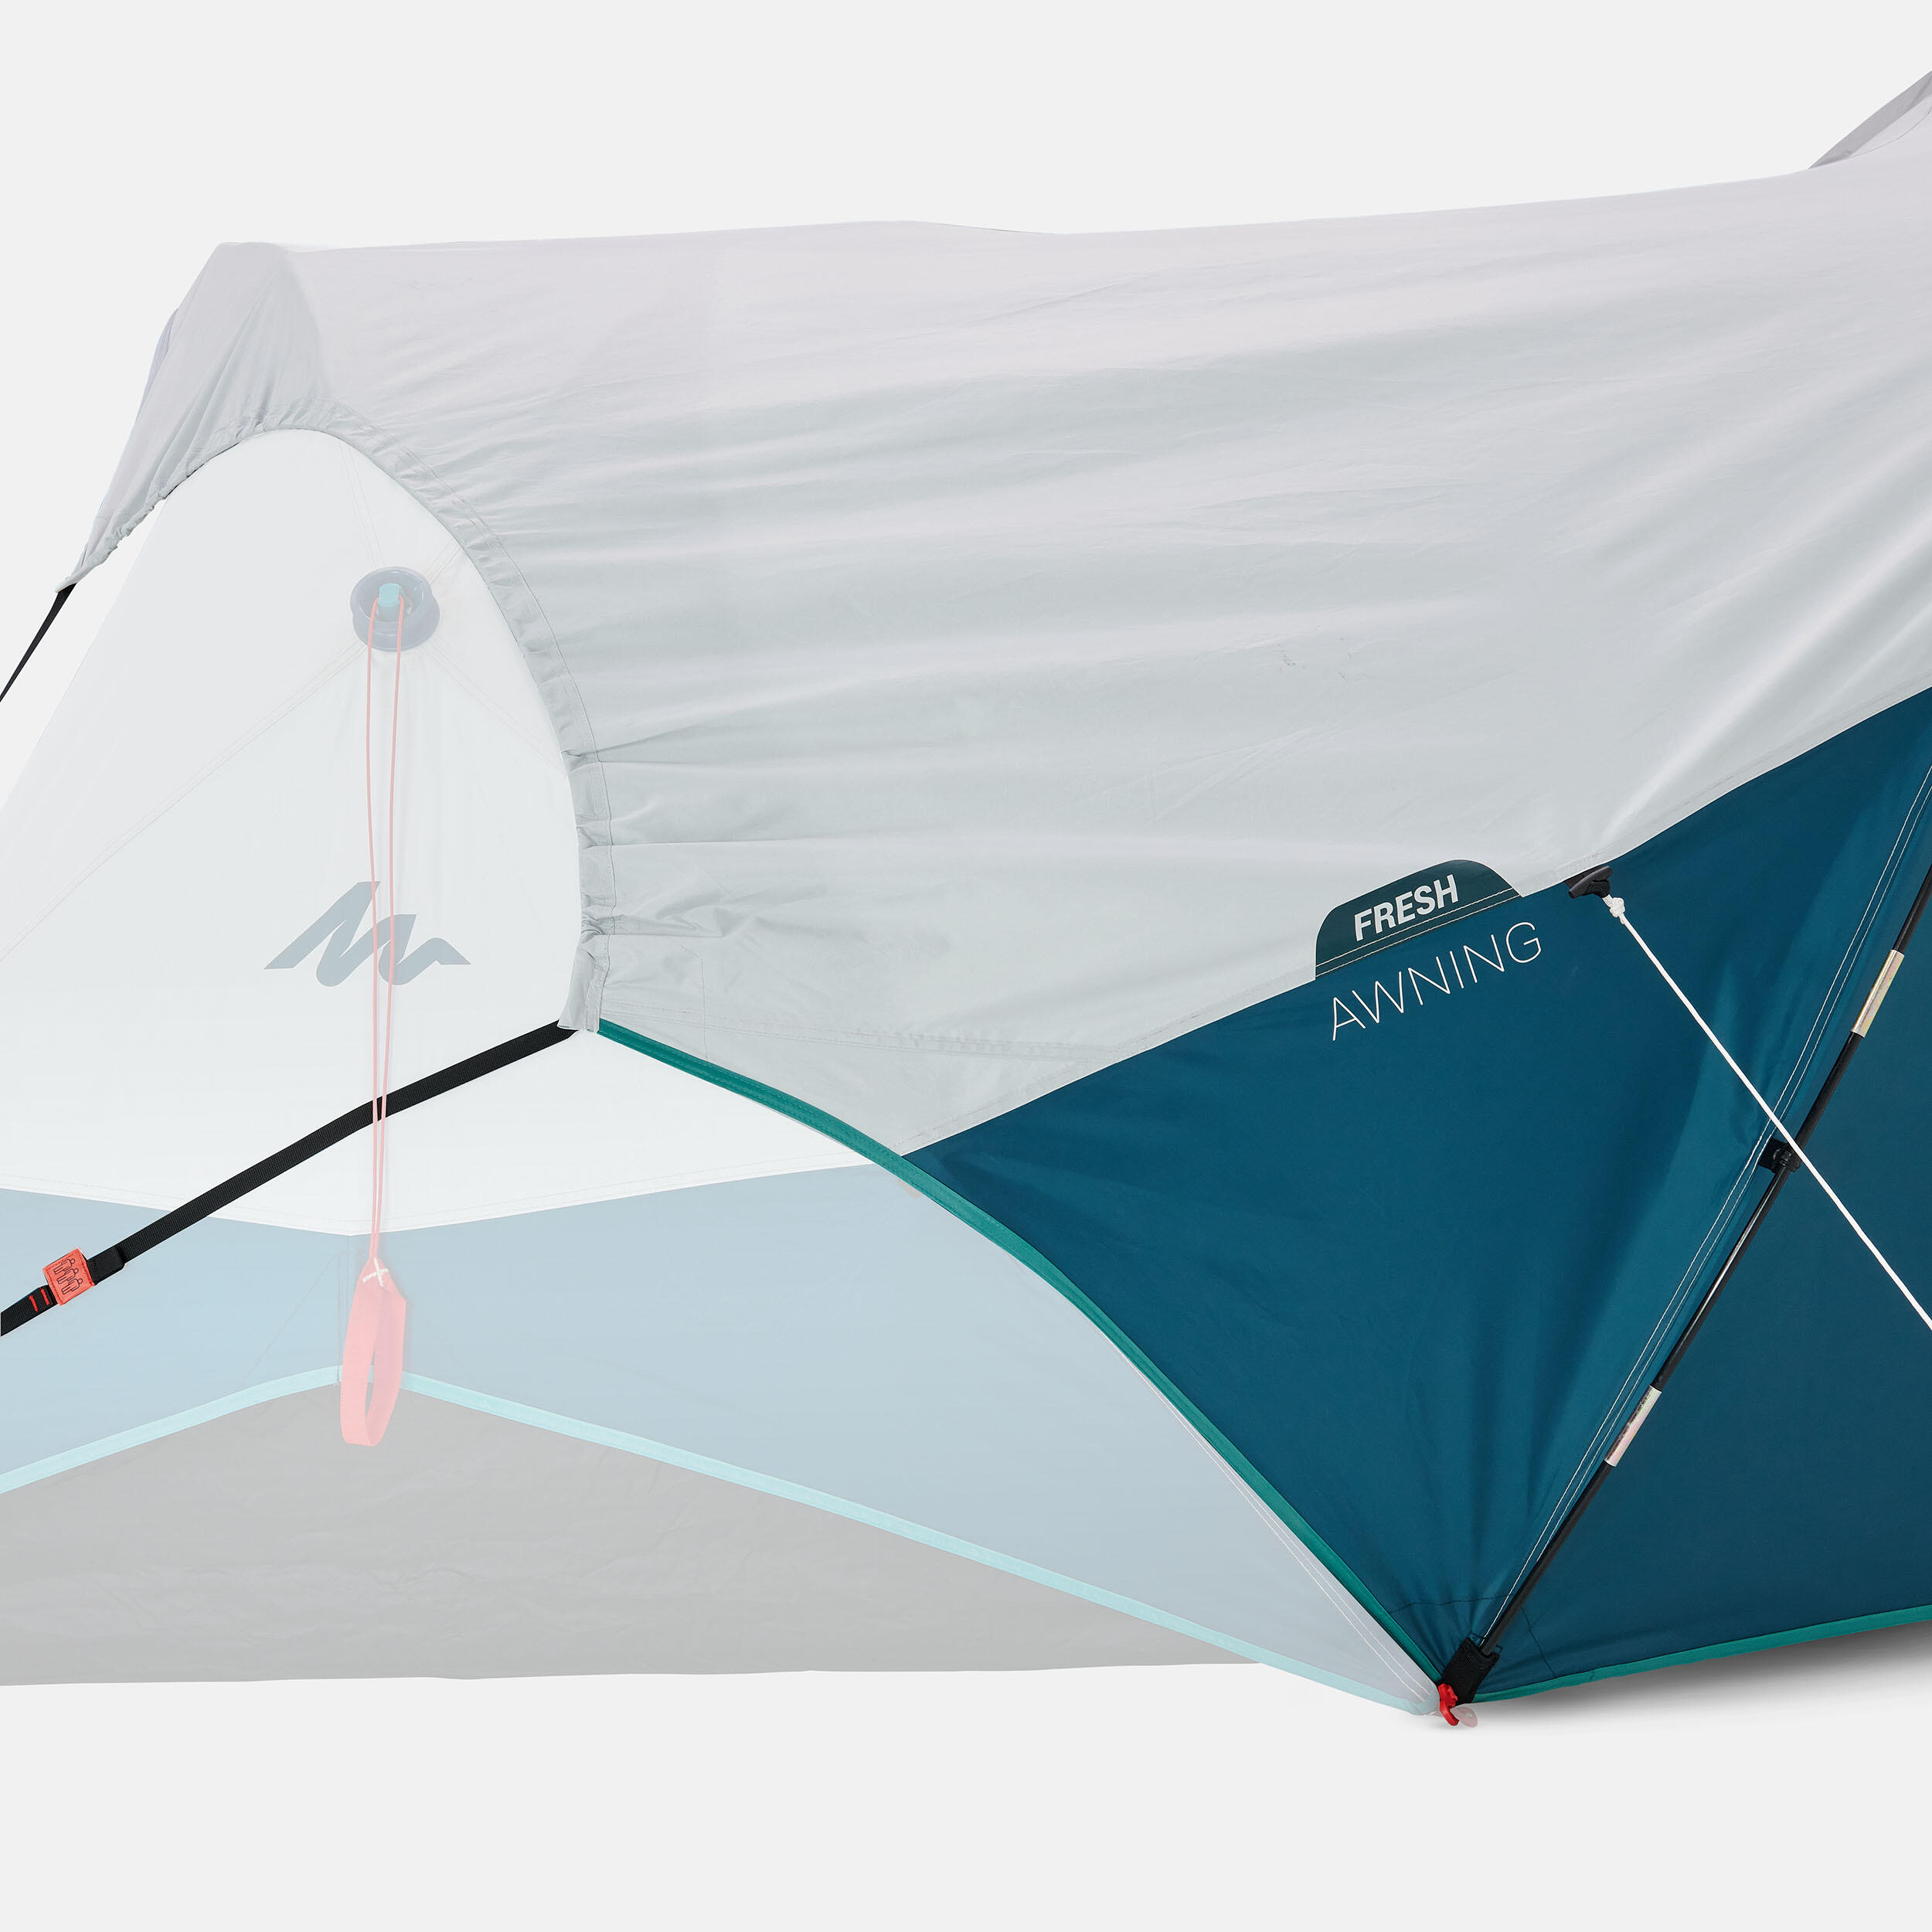 Camping awning - 2 Seconds EASY - Fresh 11/20